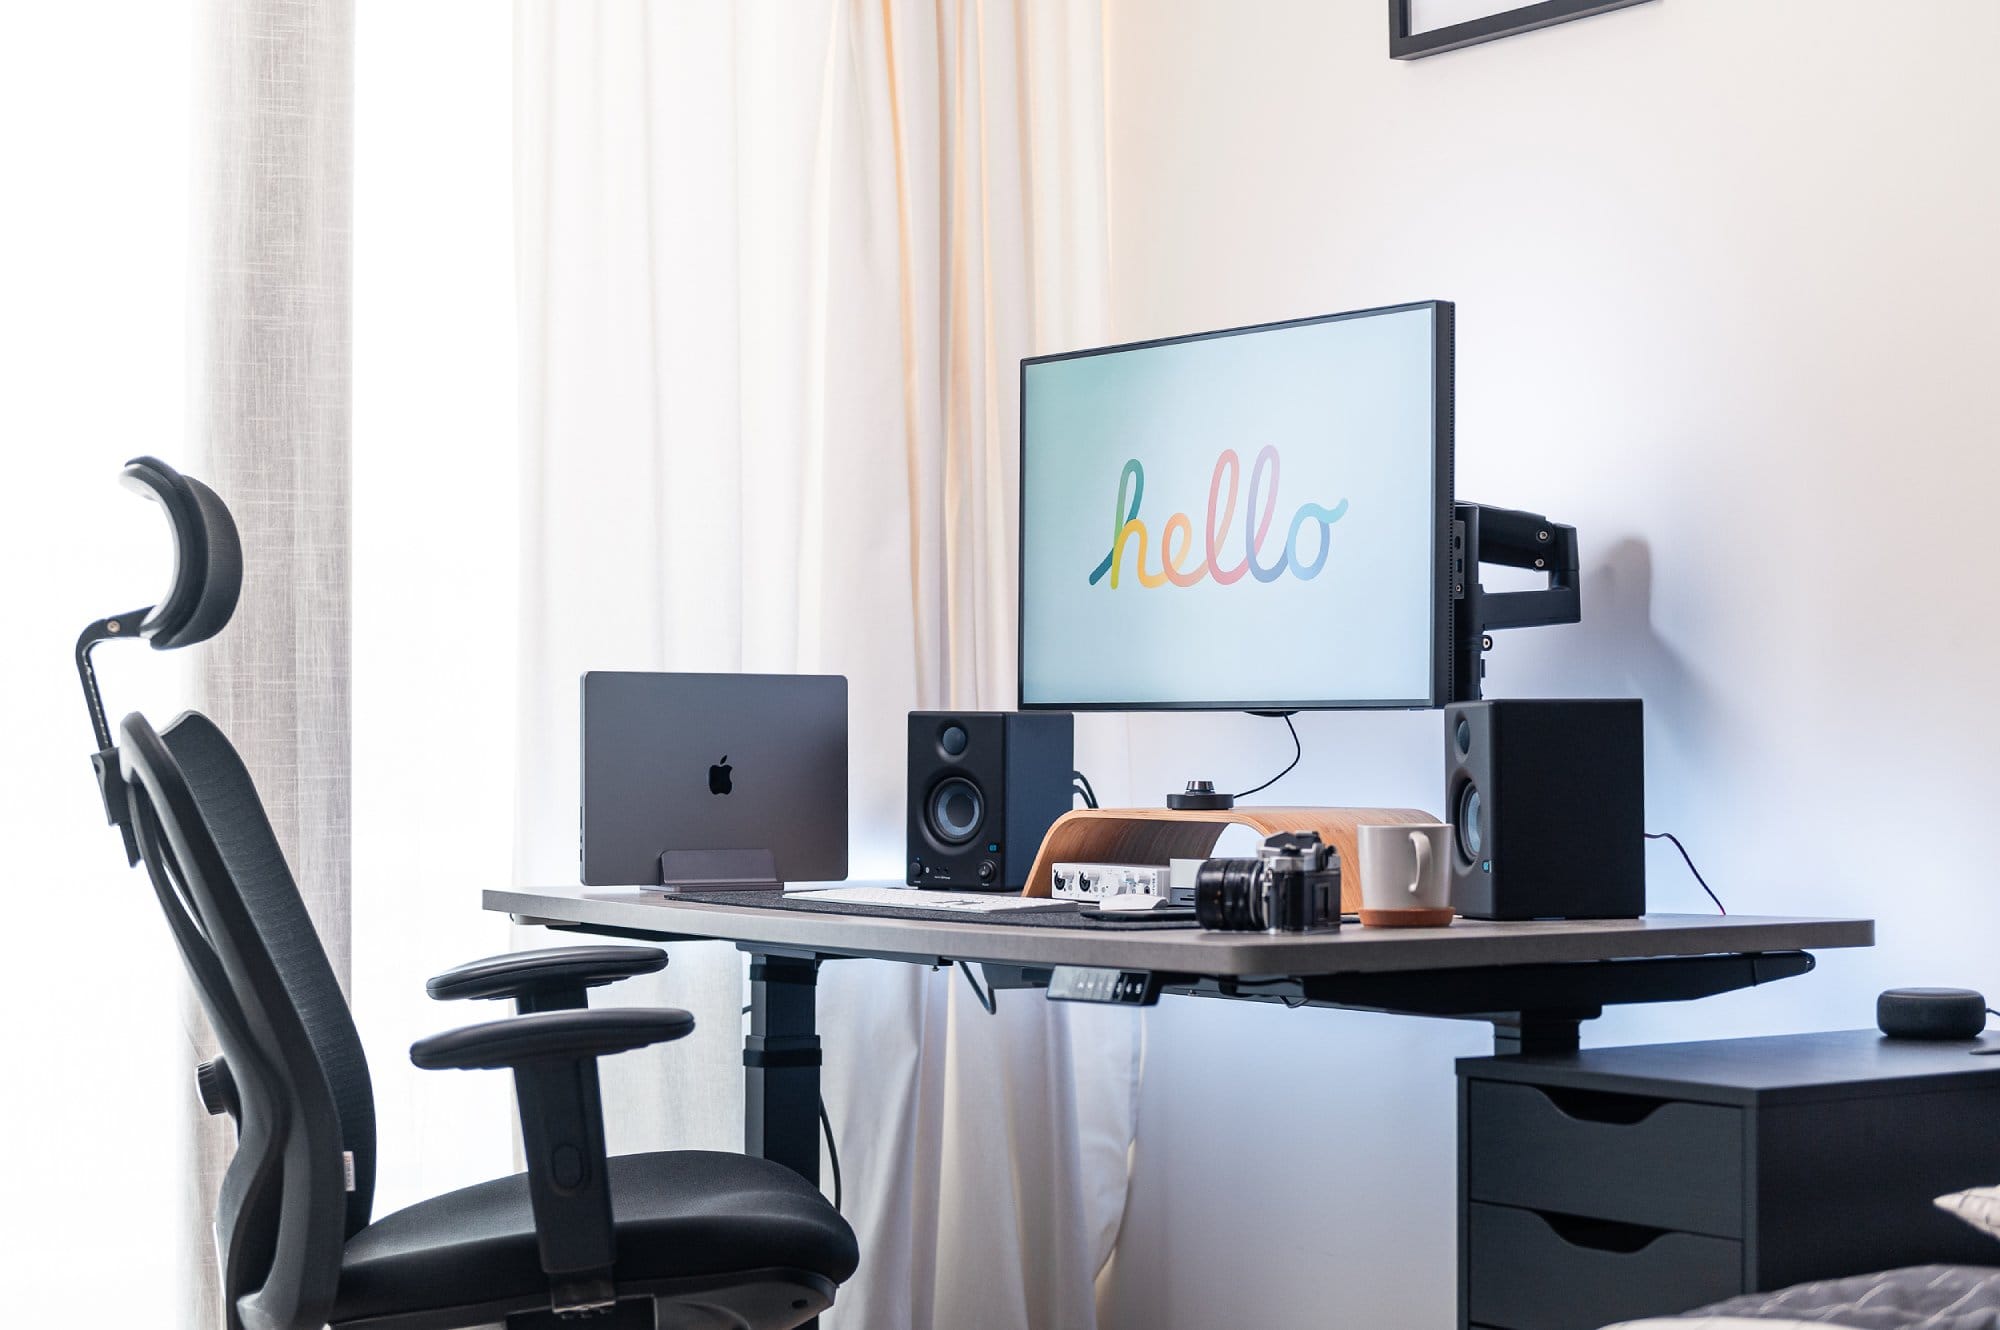 An ergonomic office chair facing a desk with a laptop, a monitor displaying the word “hello” in colourful script, speakers, a camera, and various desk accessories against a window with sheer curtains